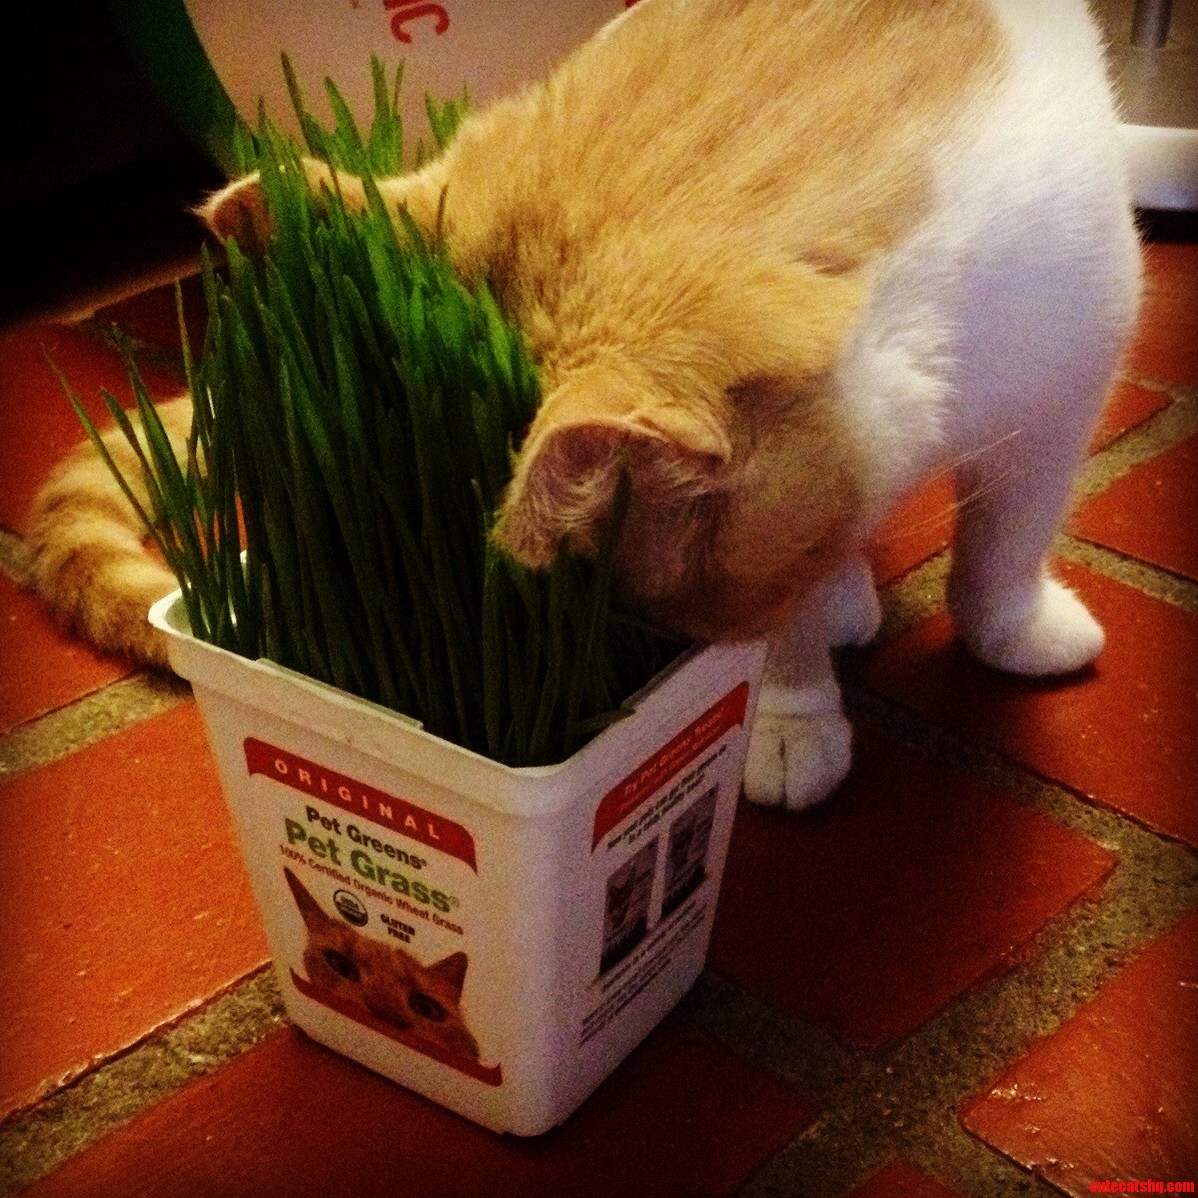 Valentine Liked The New Wheat Grass So Much She Face Planted In It.